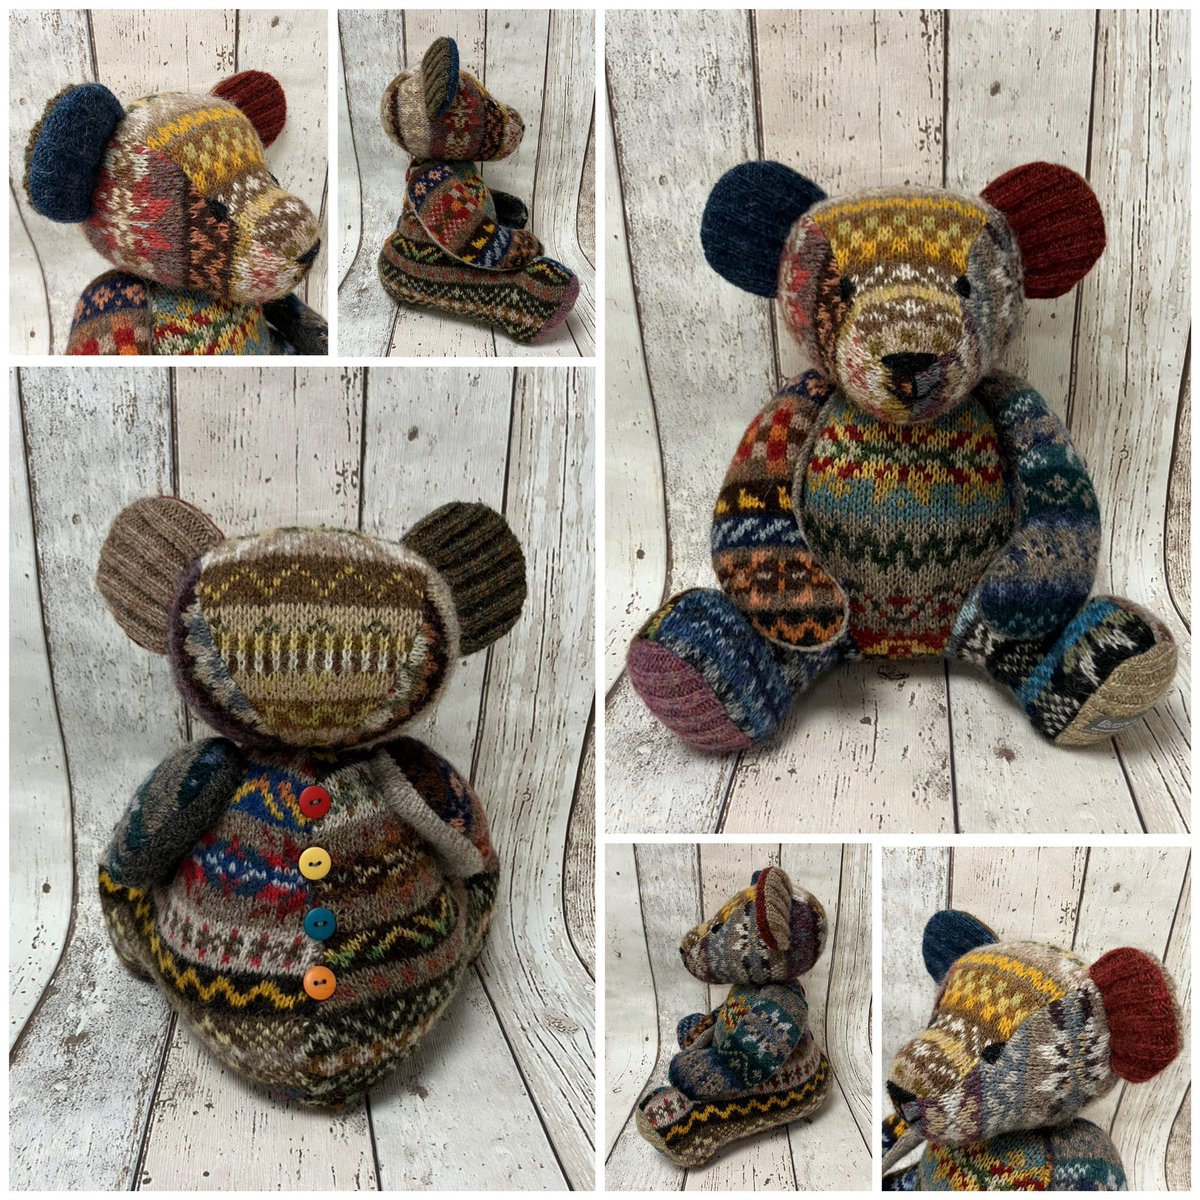 Friday Burra Bear FOR SALE:
'Ottle o' Ootnabreck' made from 10 different pieces of beautiful Fair Isle knitwear by the fabulous Jamiesons of Shetland 
£130, price includes UK P&P 
#burrabears #shetland #FairIsleFriday